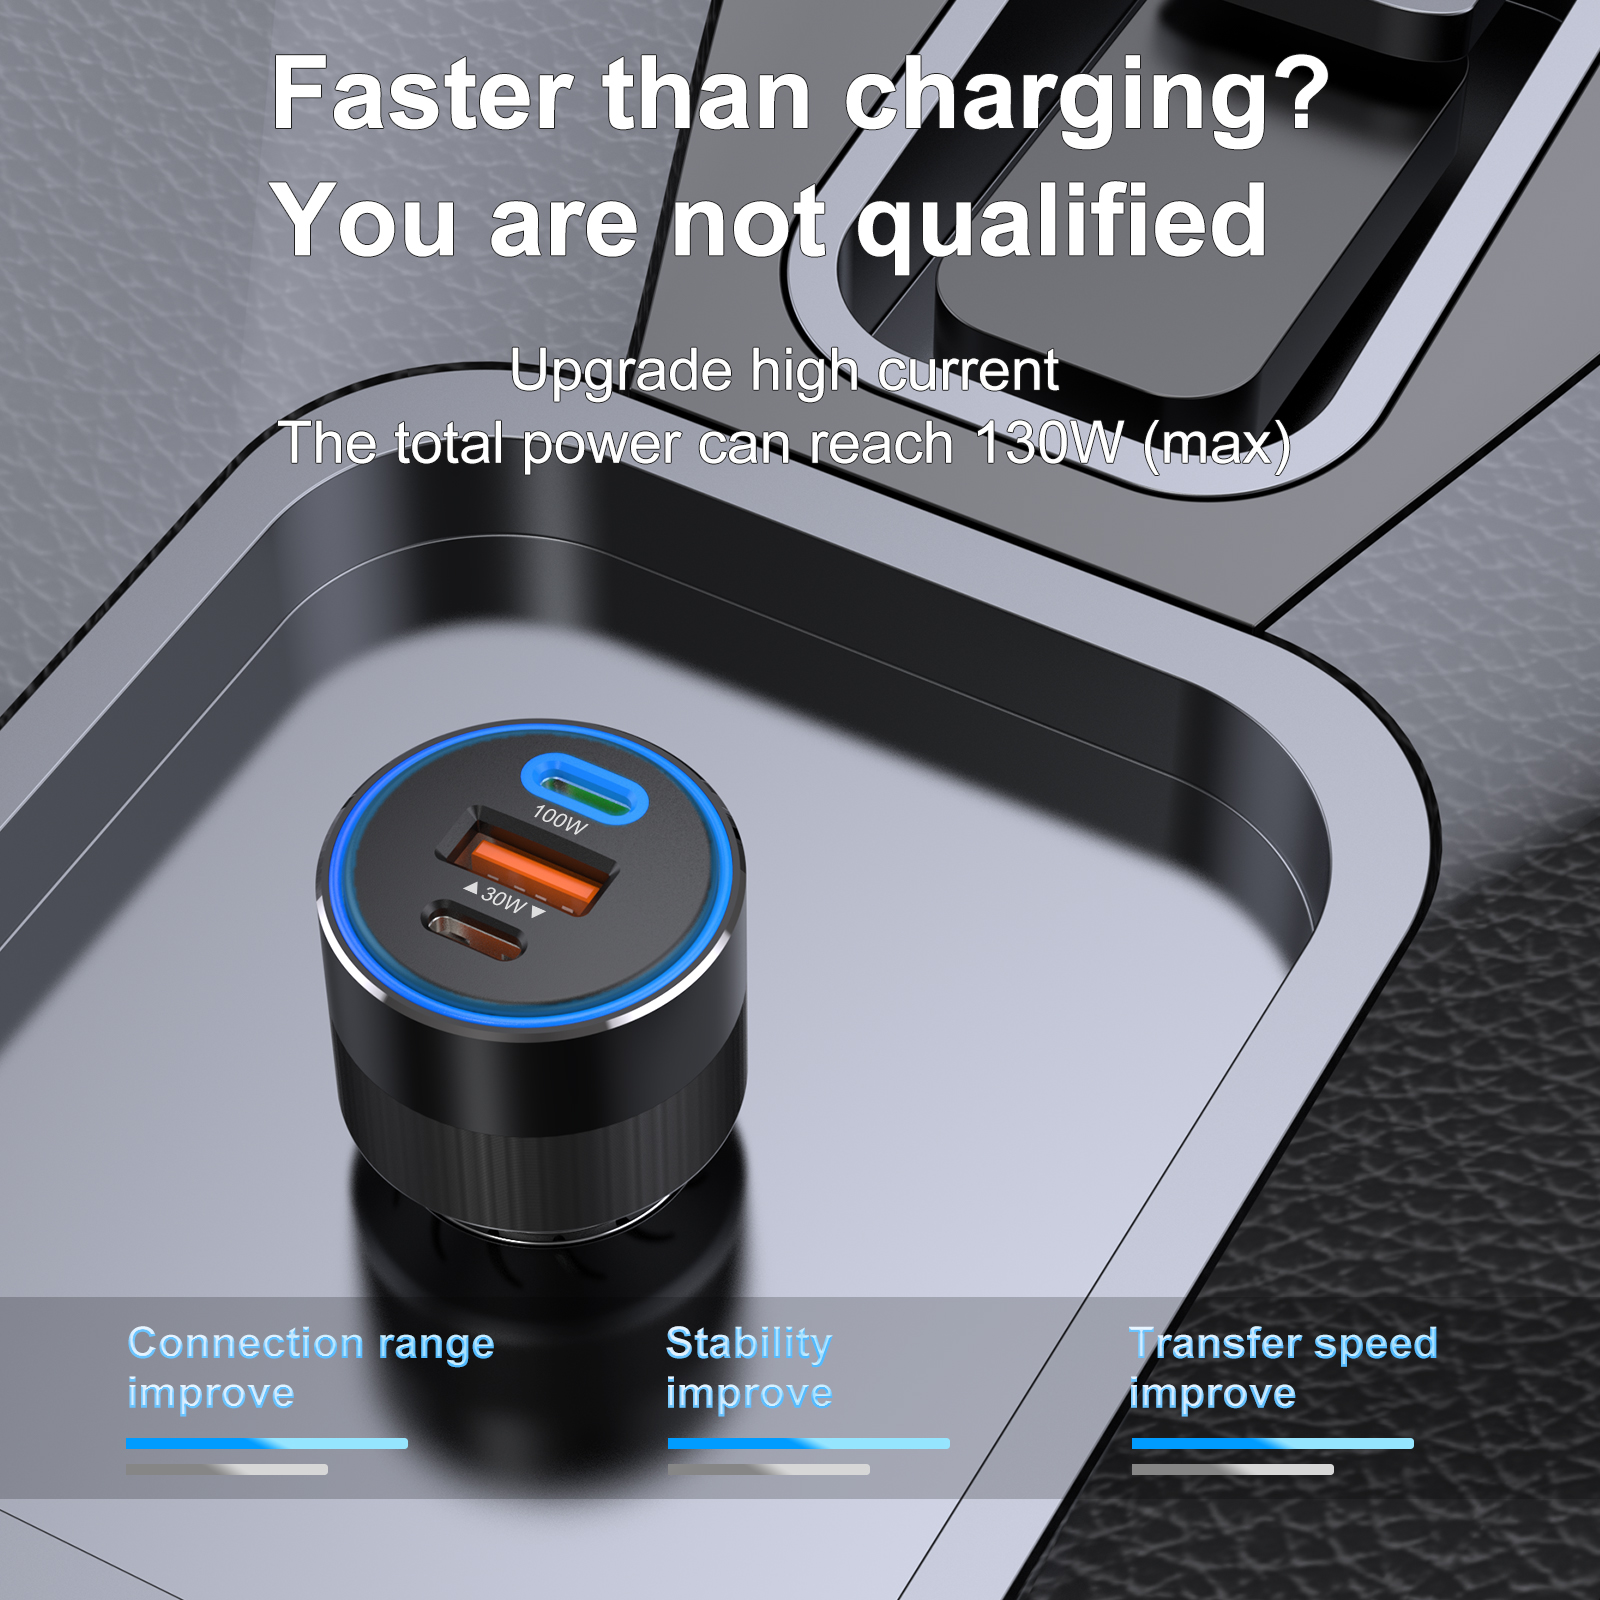 car charger, fast charger, led indicator, multi ports charger, widely compatible